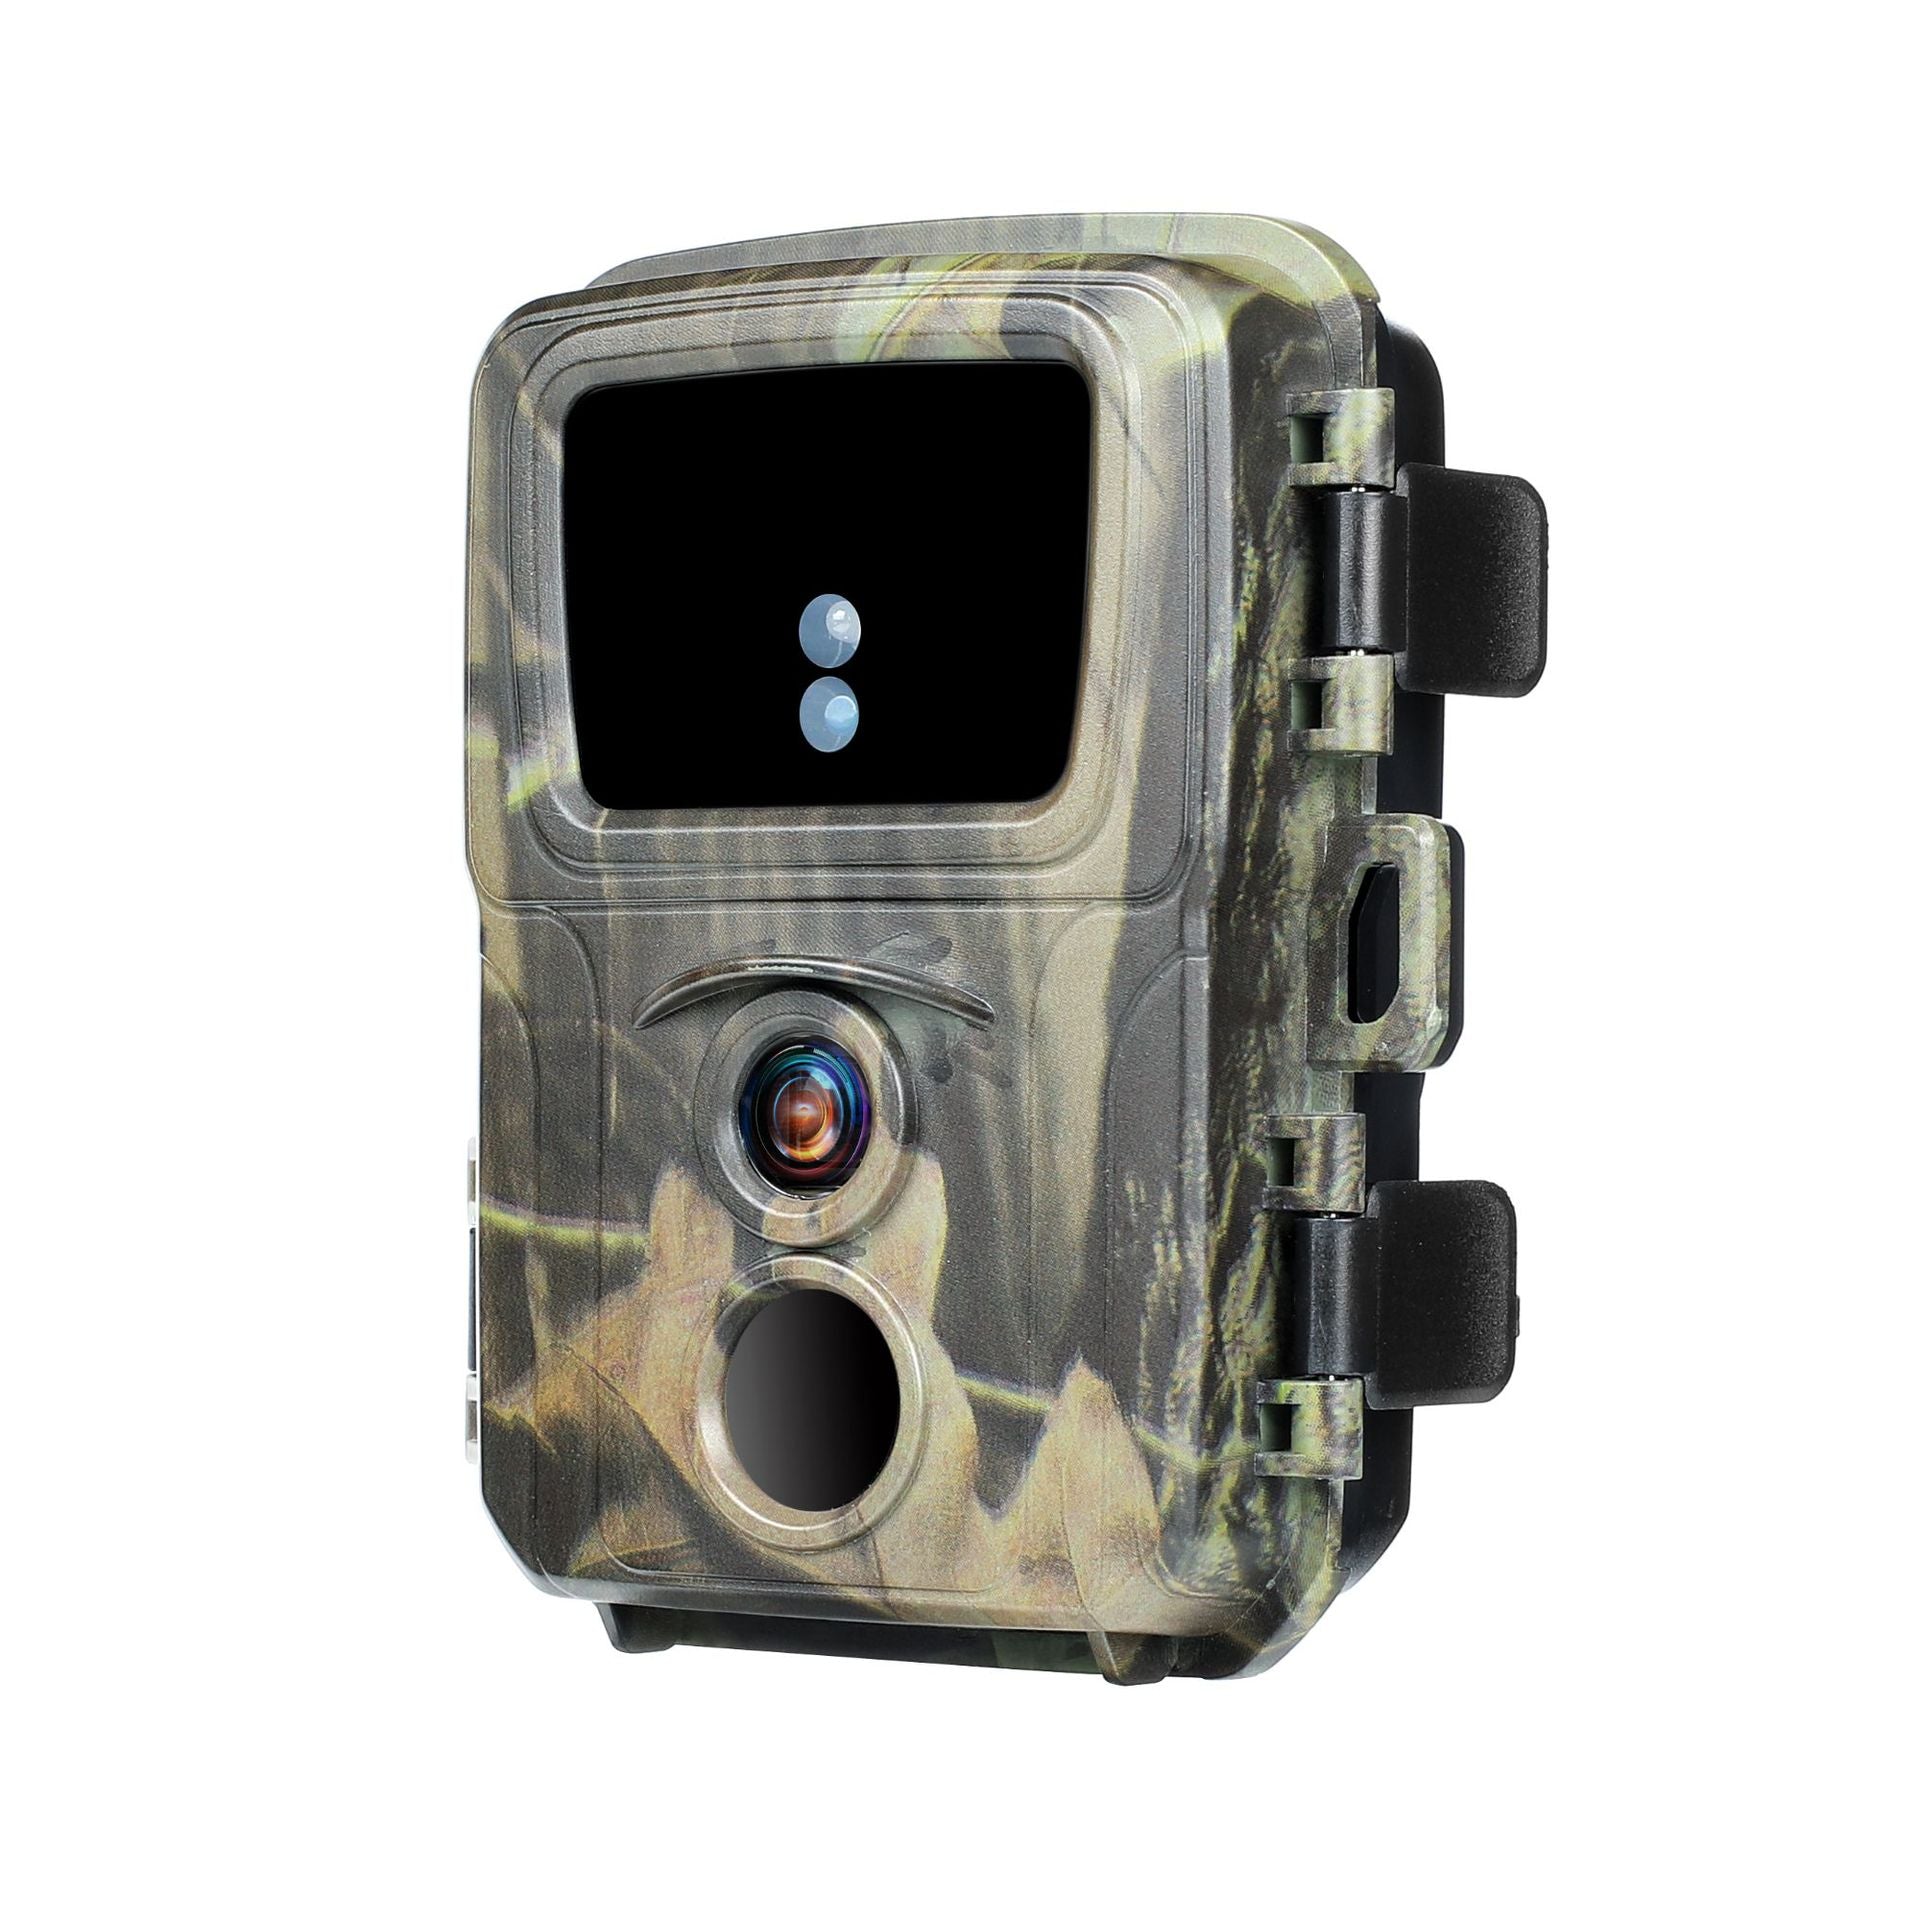 Infrared Tracking Hunting Camera Plug-in Card Ready To Use